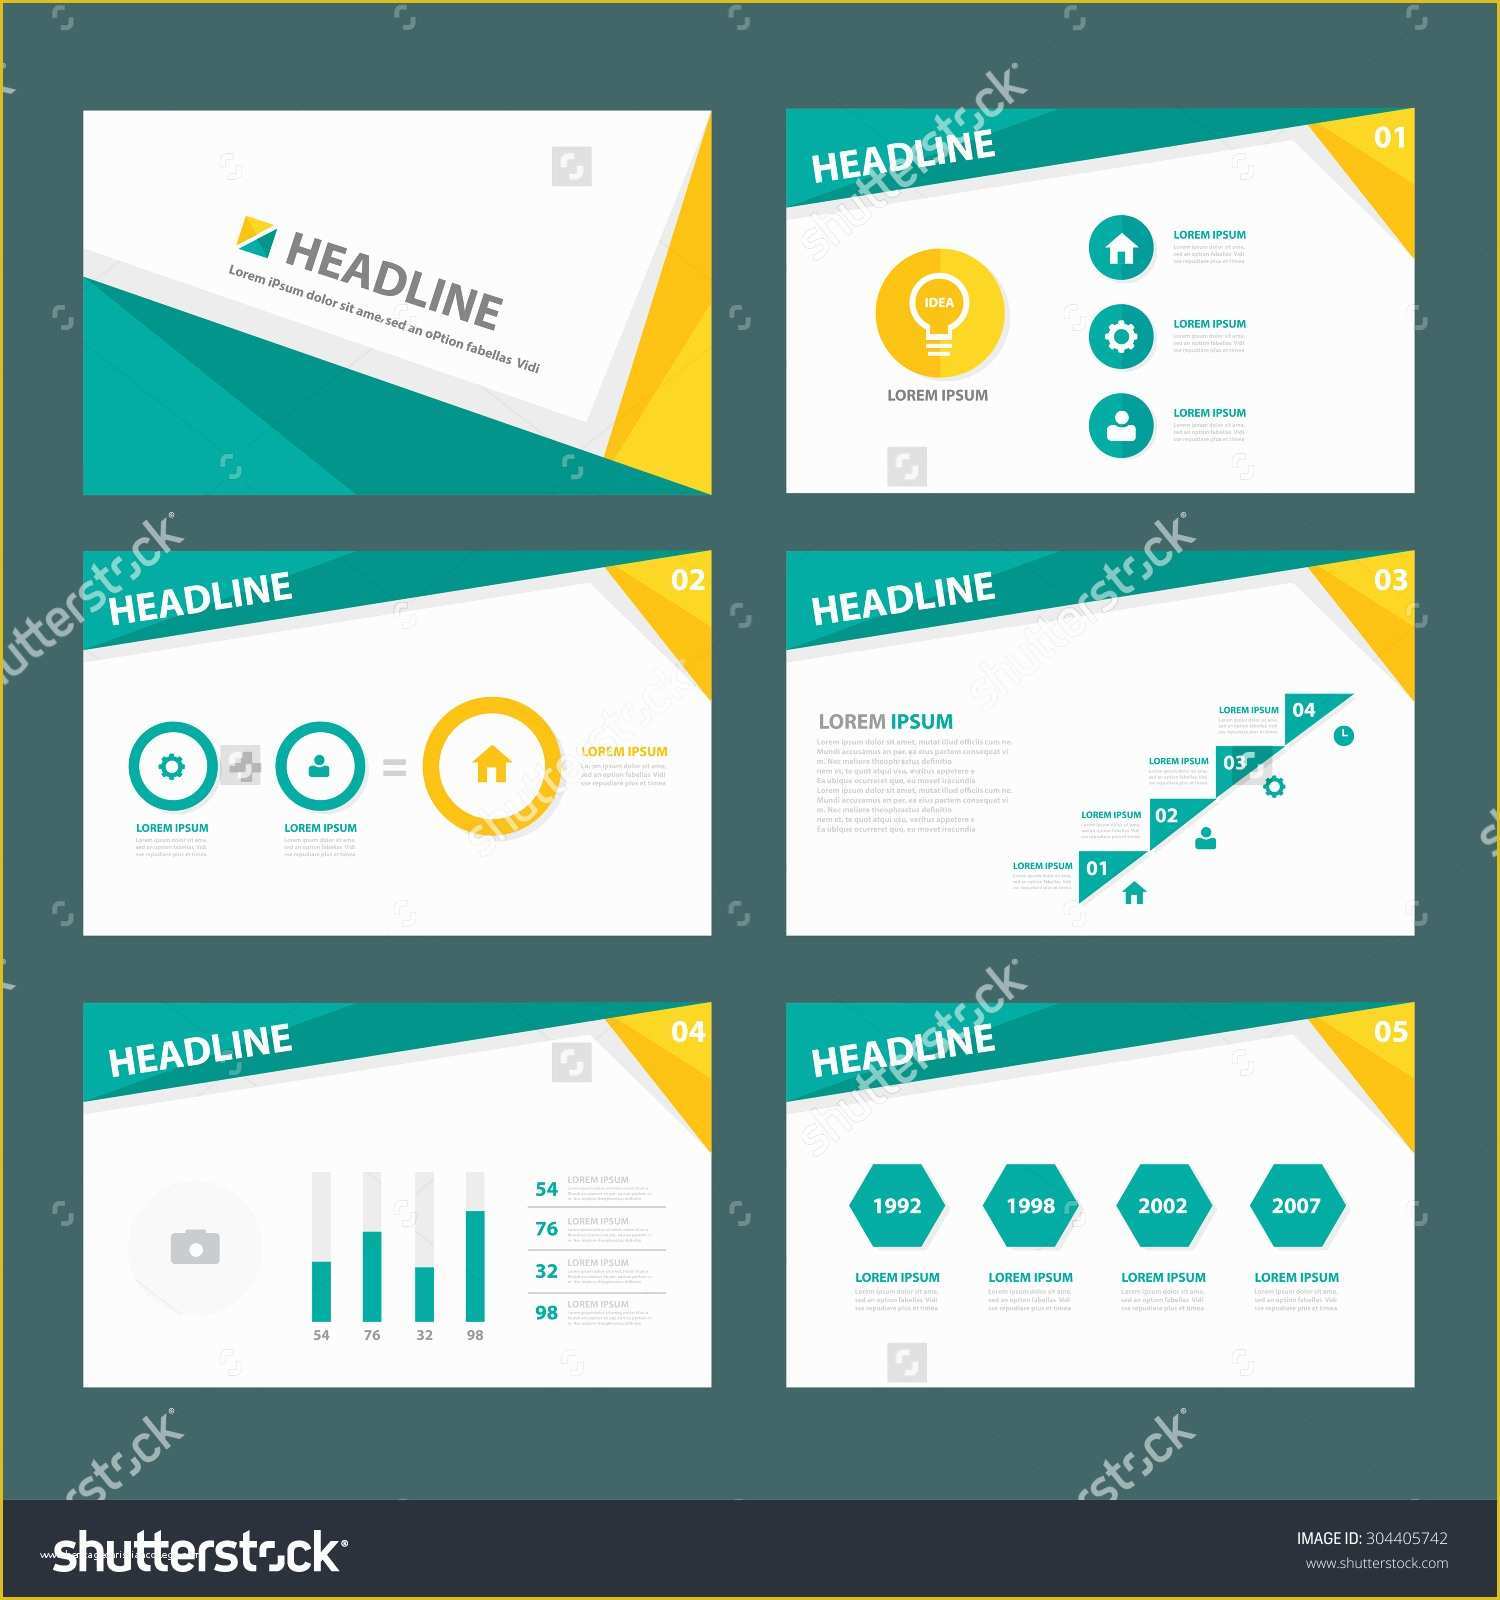 Powerpoint Flyer Templates Free Of Powerpoint Flyer Template Image Collections Templates